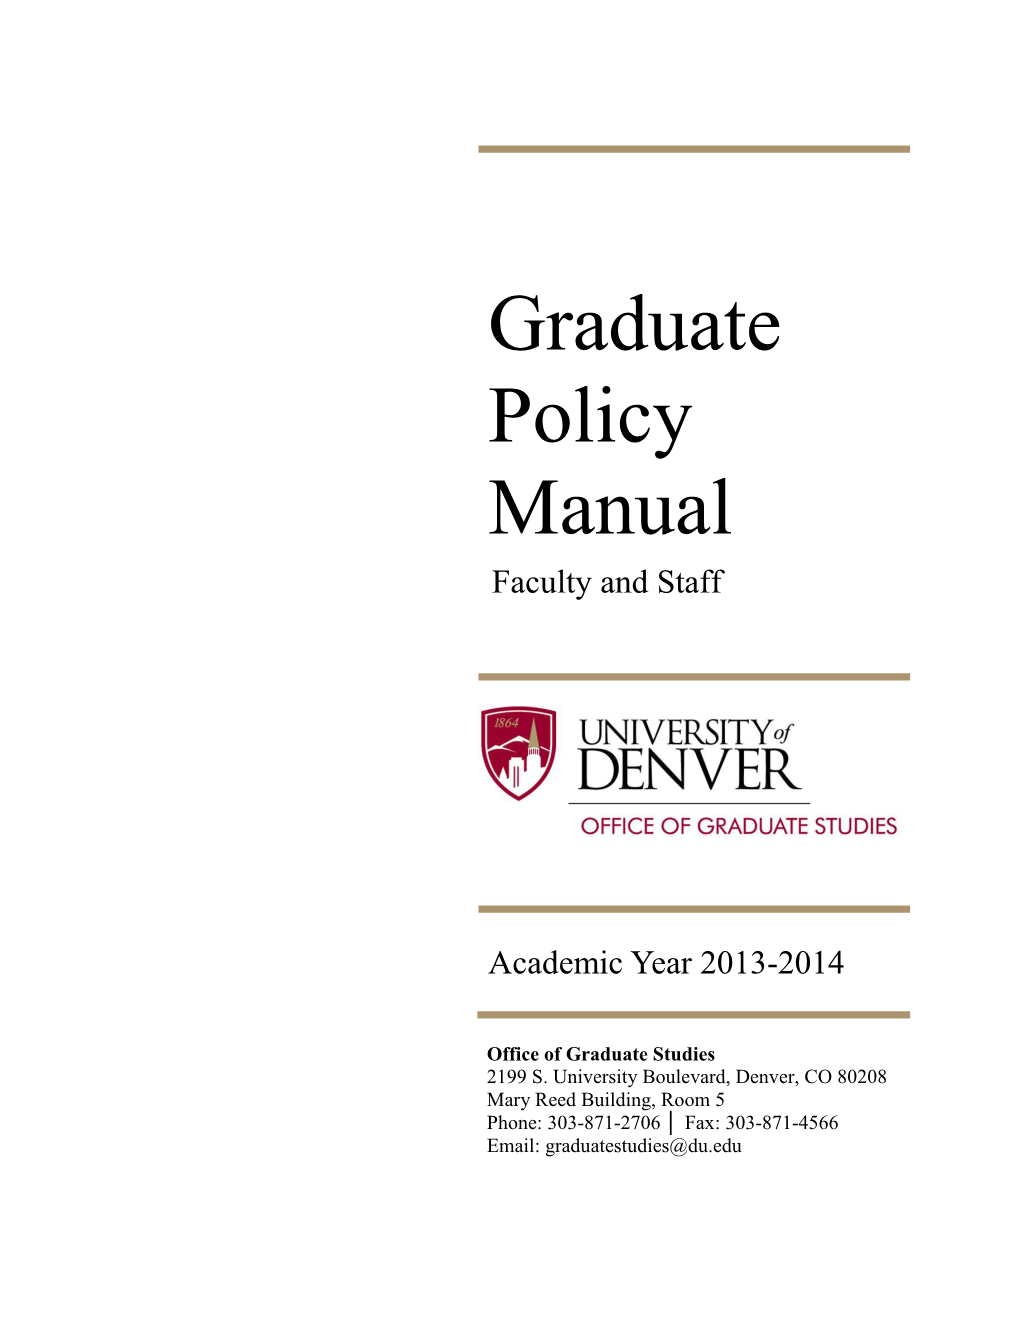 Graduate Policy Manual Faculty and Staff